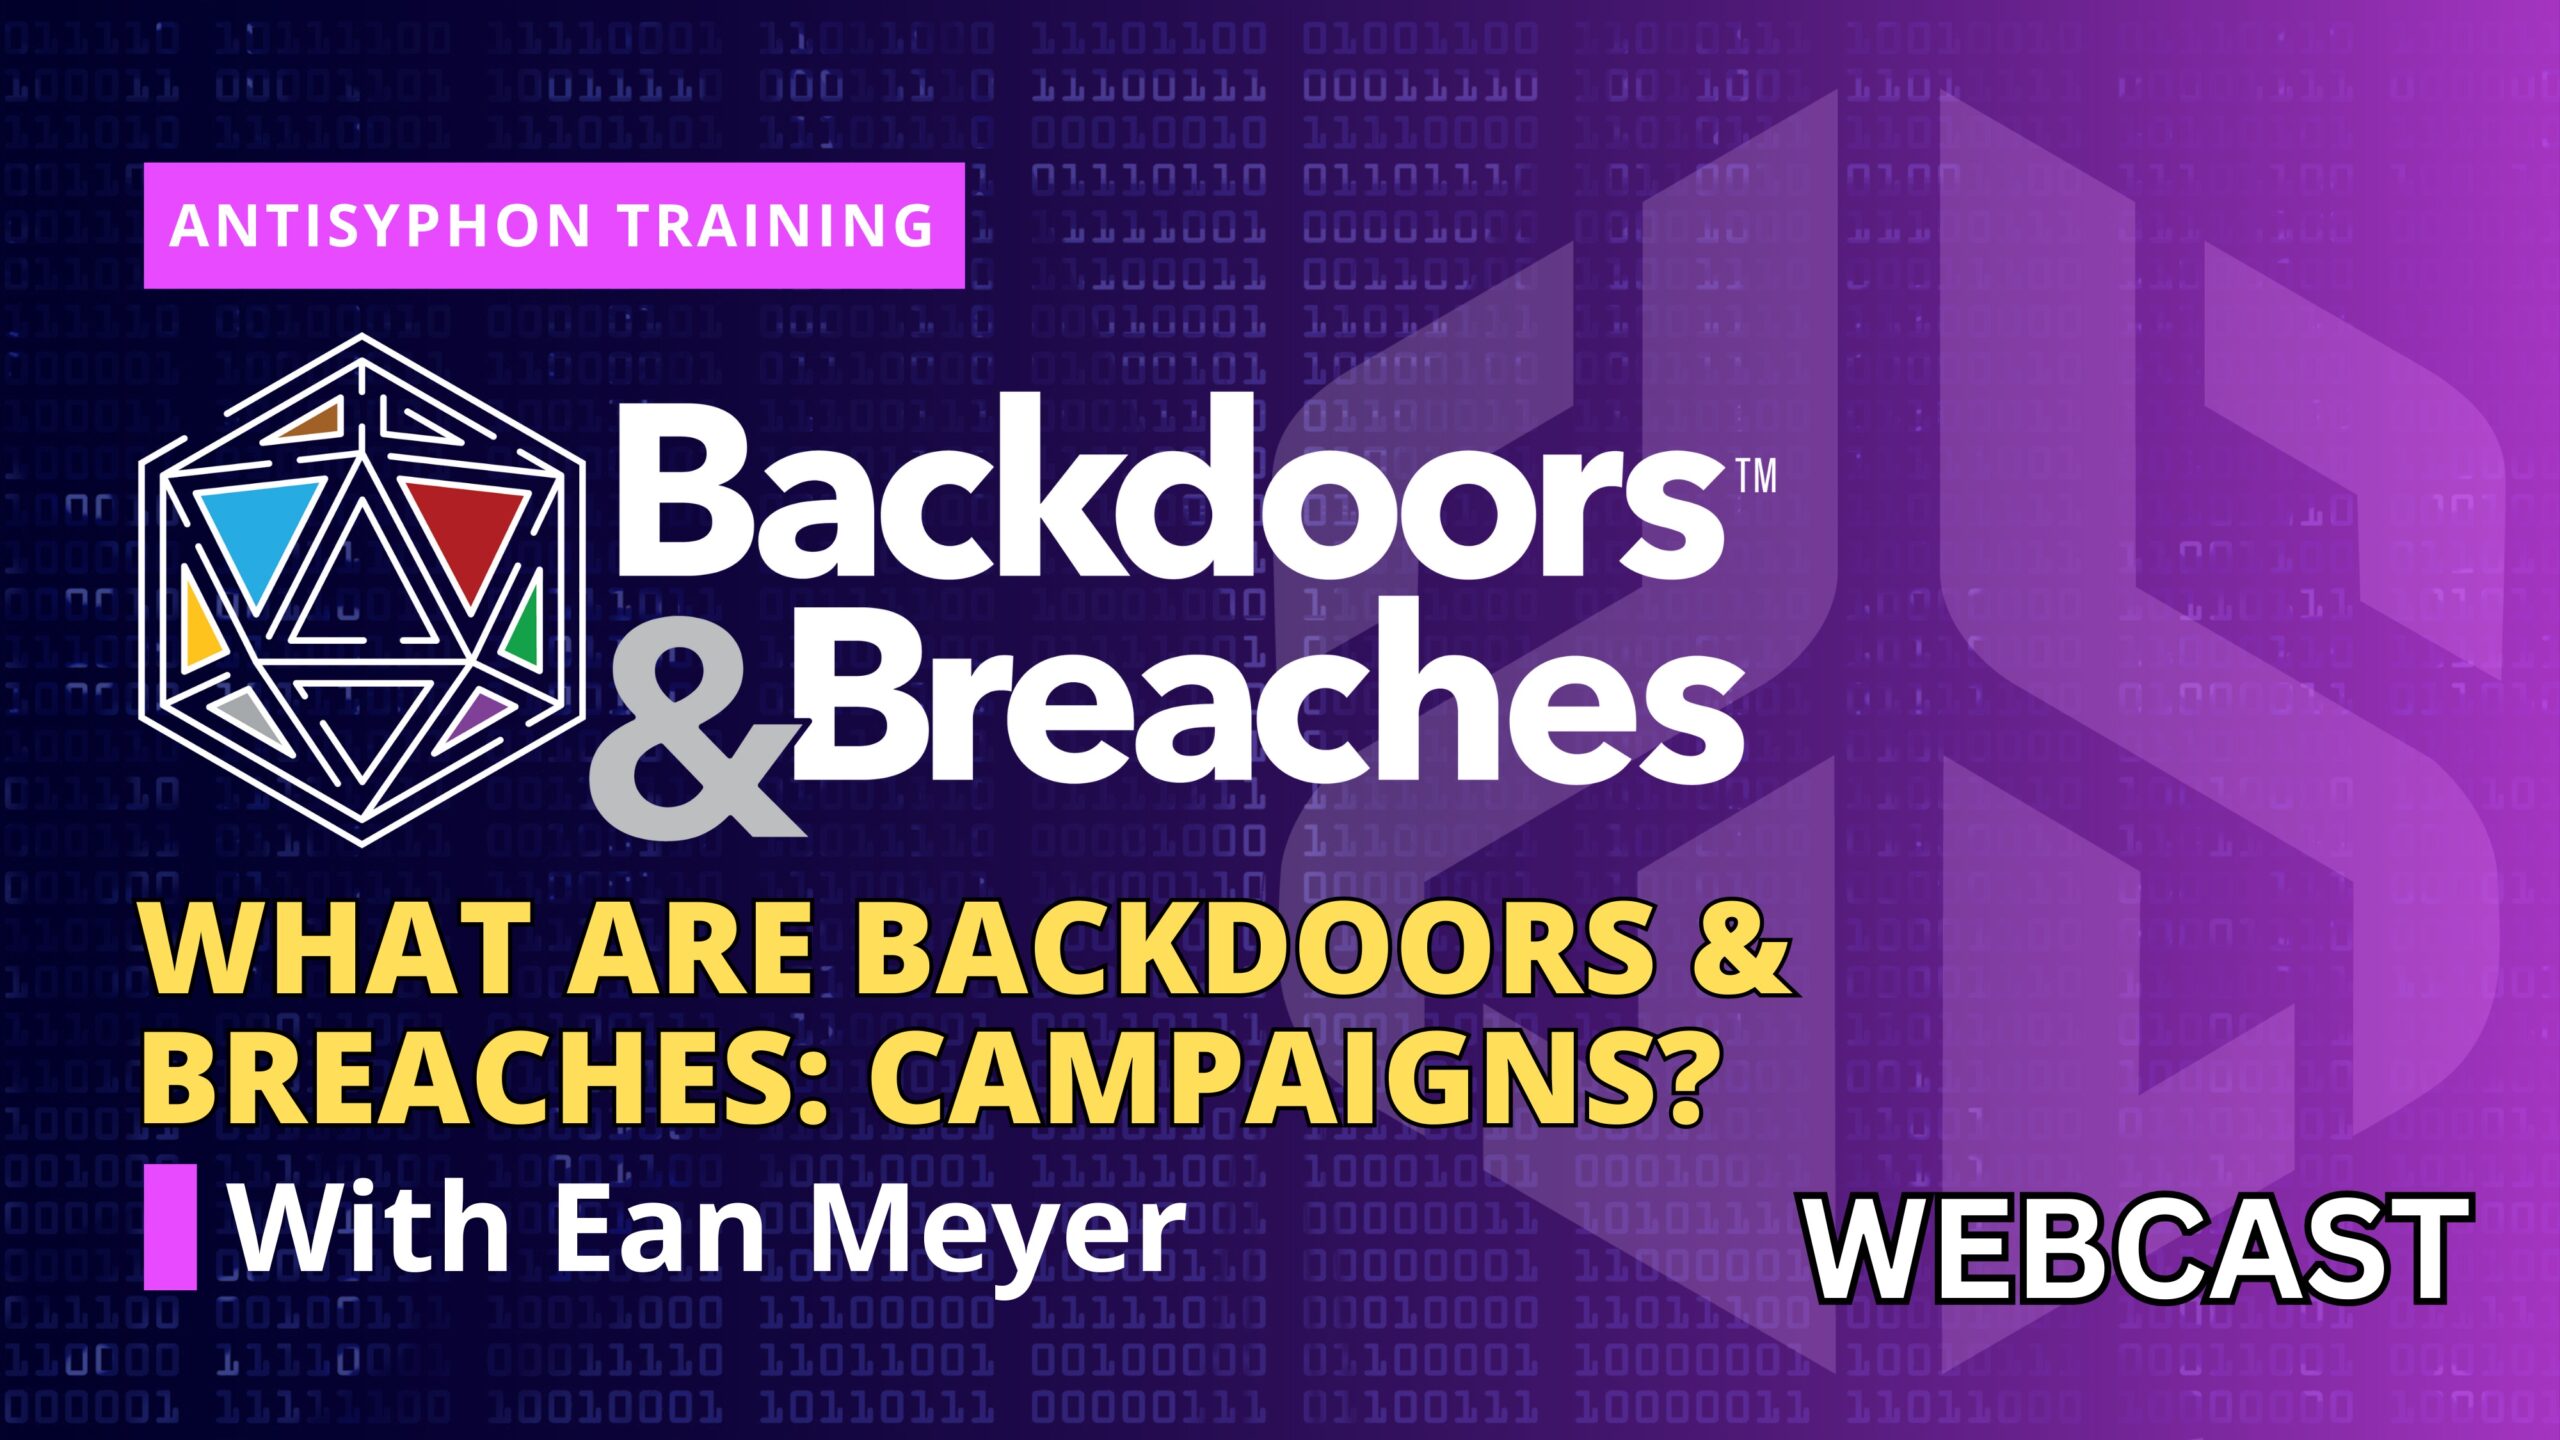 What are Backdoors & Breaches: Campaigns?